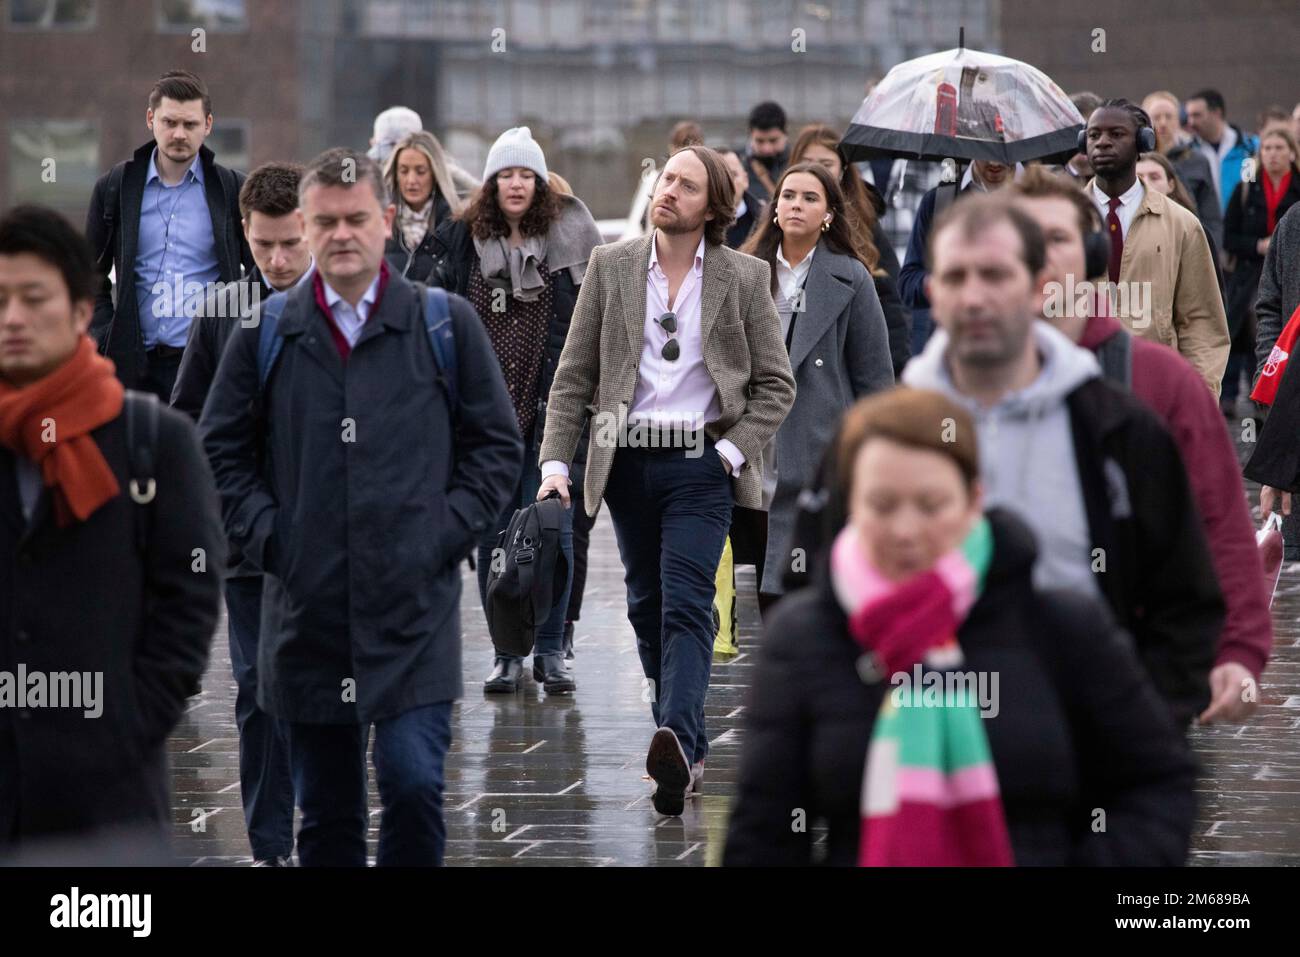 London, UK. 03rd Jan, 2023. London commuters make their way to the office across London Bridge on their first day back to work in 2023, avoiding train strikes which are causing widespread disruption across the country and millions of people have been advised to avoid rail travel. 03rd January, 2023, City of London, England, UK Credit: Jeff Gilbert/Alamy Live News Stock Photo